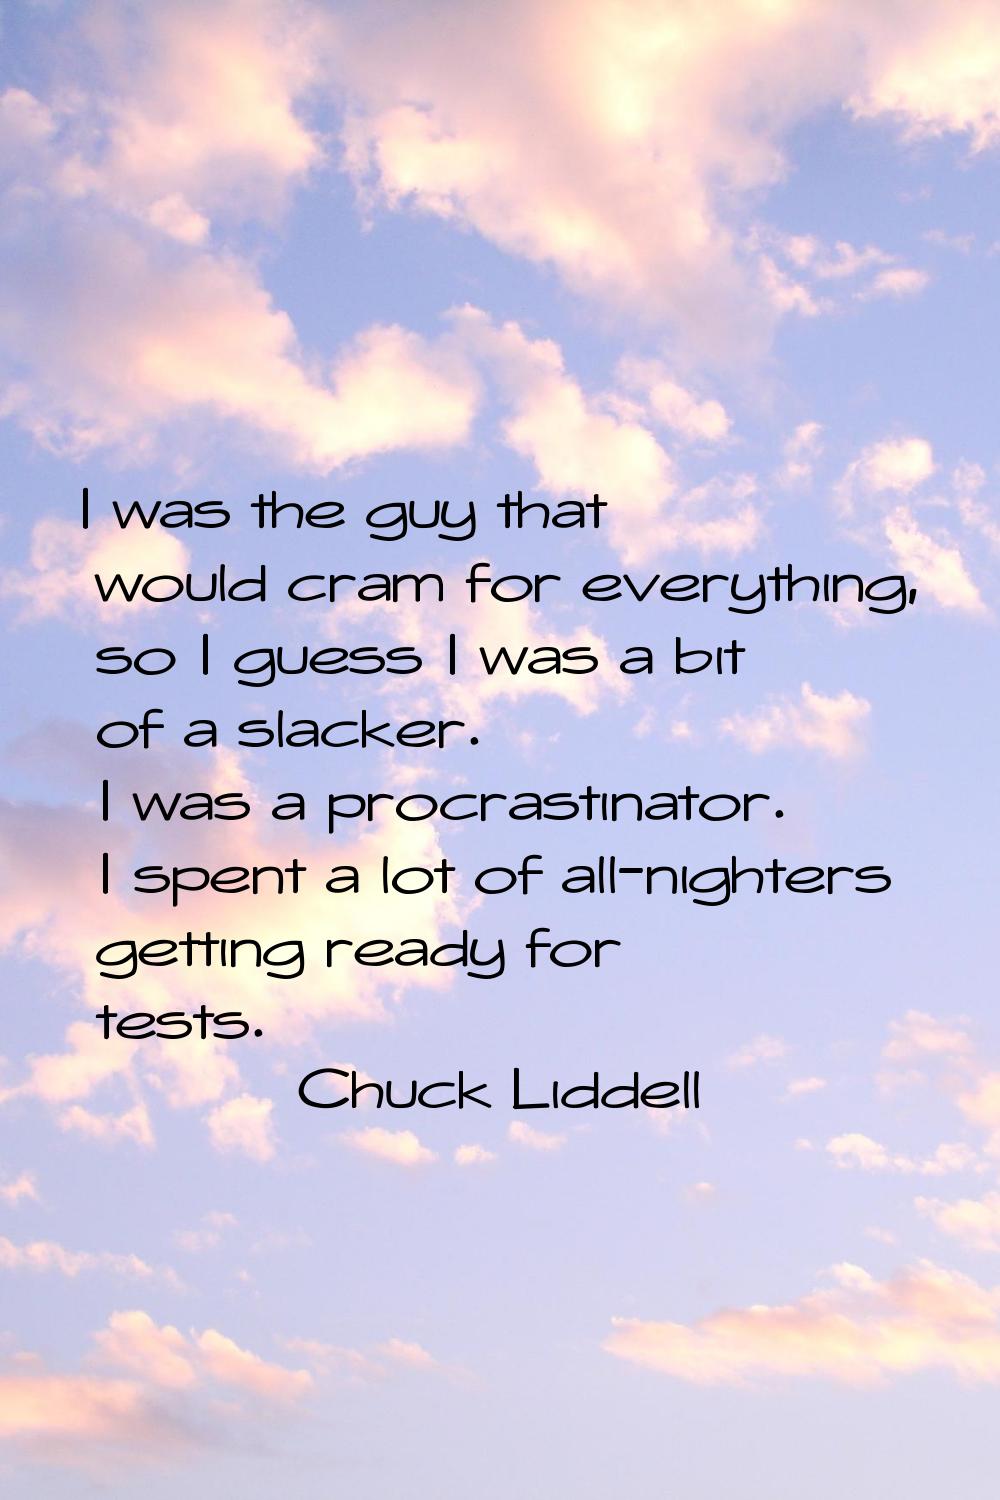 I was the guy that would cram for everything, so I guess I was a bit of a slacker. I was a procrast